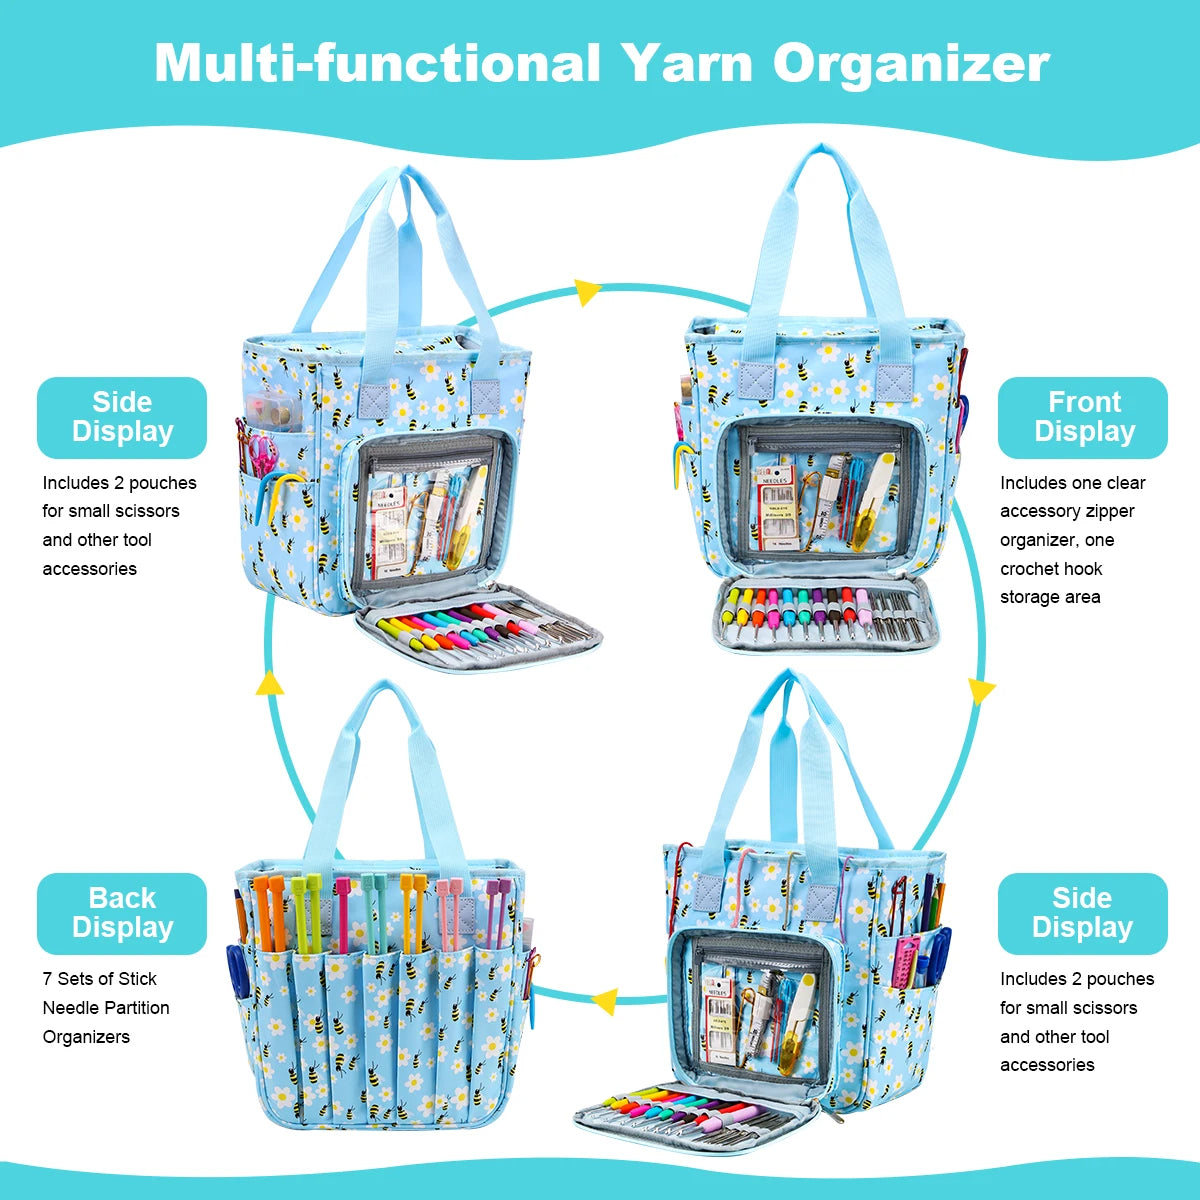 A Multifunctional Knitting Tote Bag: Yarn Storage Organizer with various compartments for yarn, scissors, hooks, and other knitting supplies displayed from the front, side, and back.